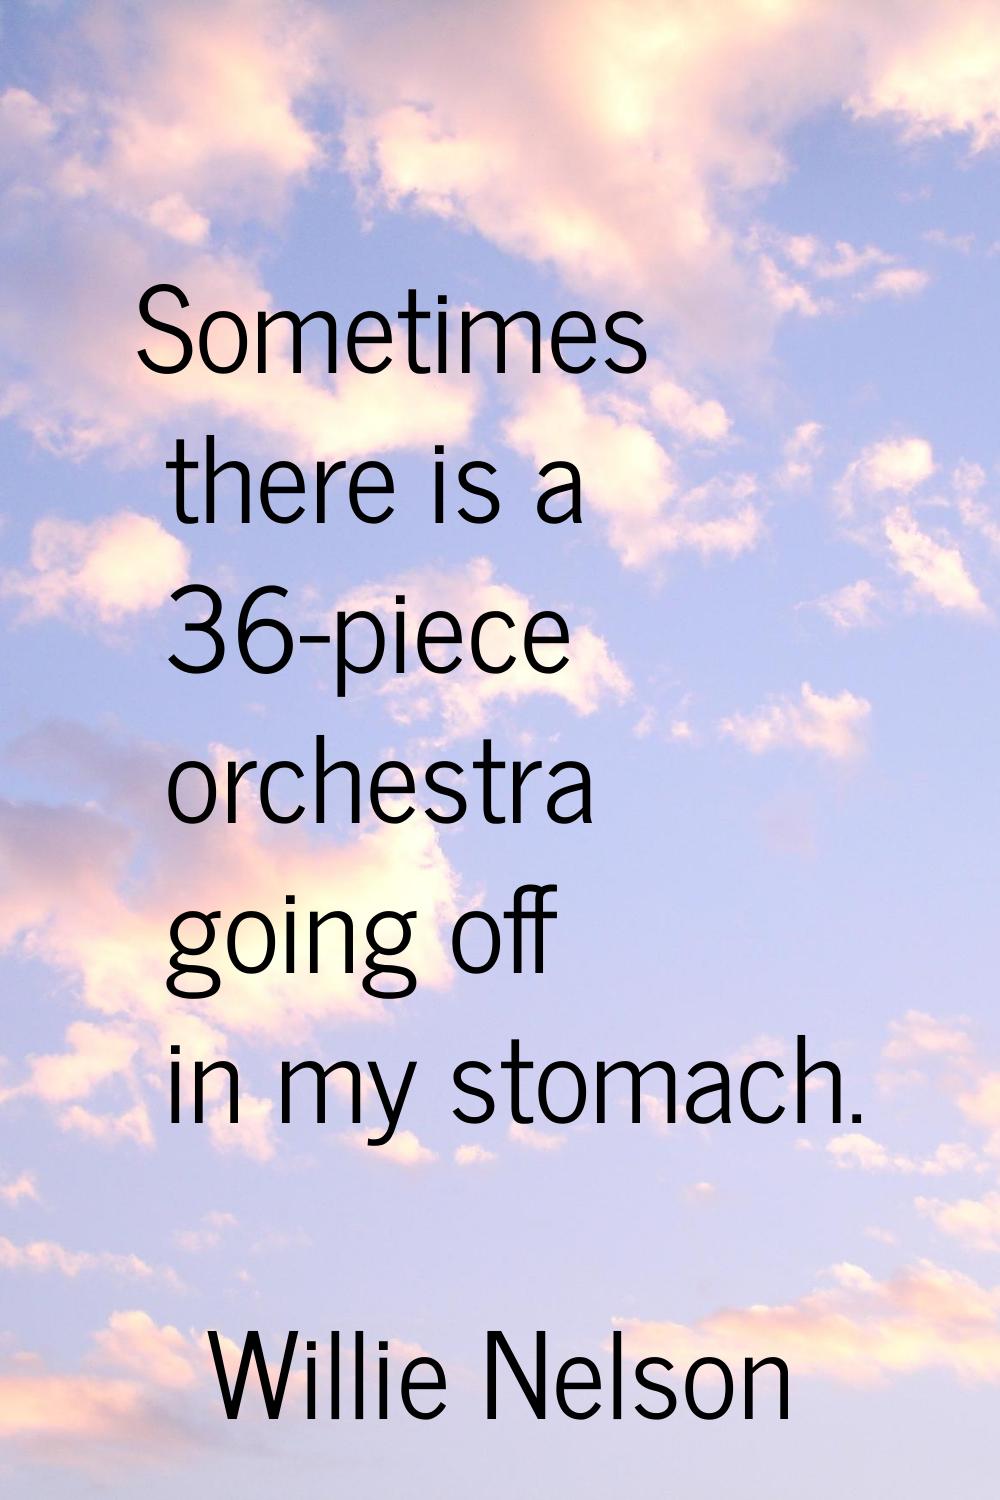 Sometimes there is a 36-piece orchestra going off in my stomach.